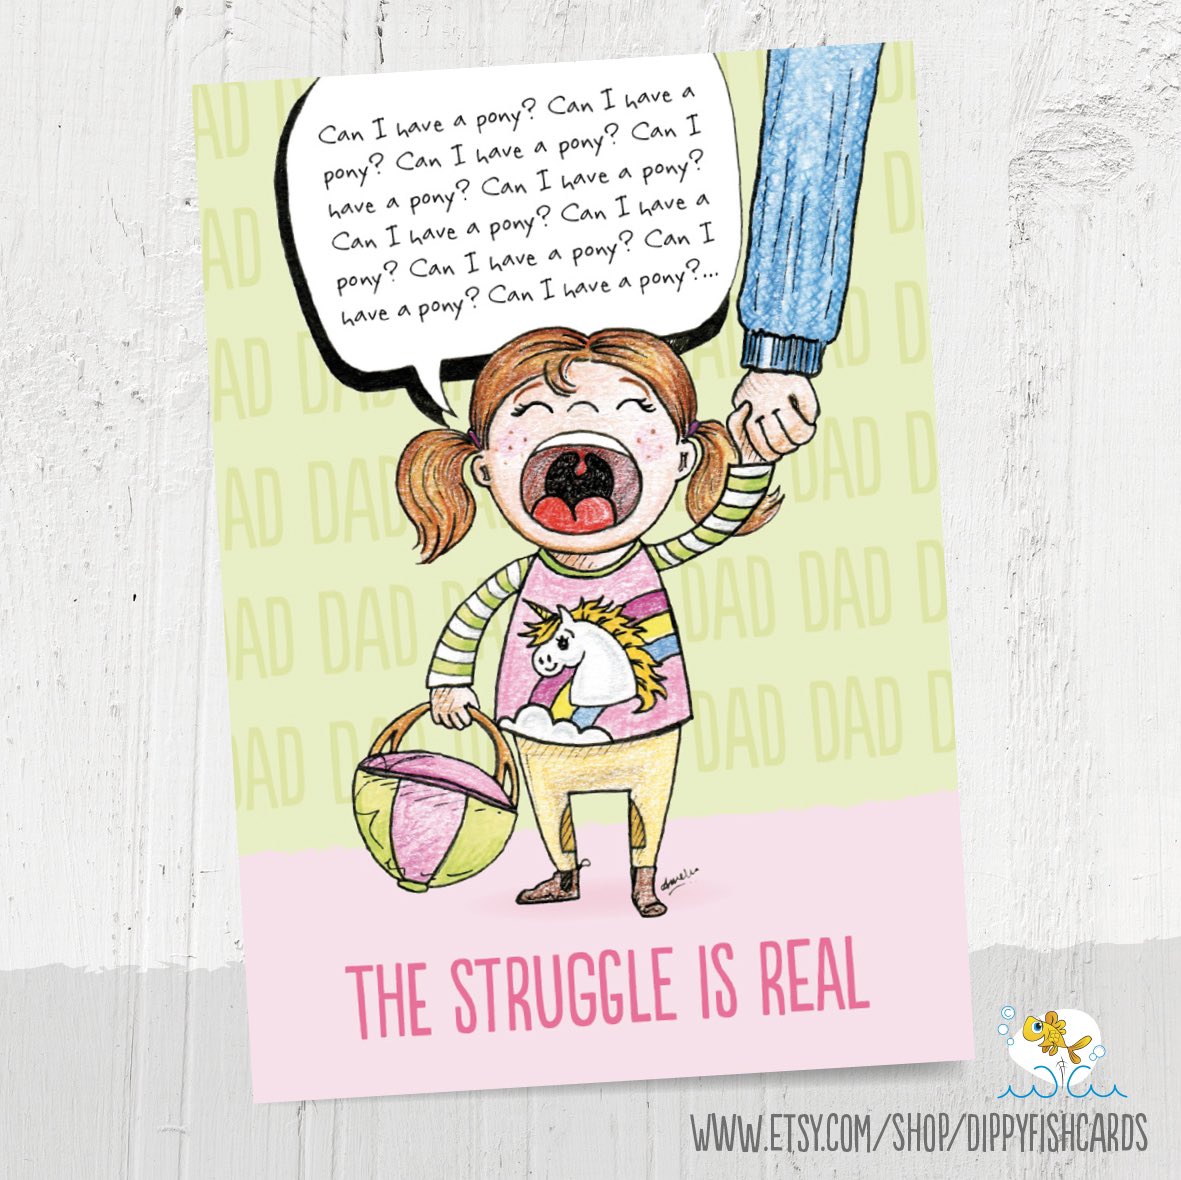 Need a Father’s Day card for pony-mad girlies? I got you covered. This one is autobiographical (my poor papa!) - the struggle is real #earlybiz #mhhsbd #ponyhour #elevenseshour dippyfishcards.etsy.com/listing/619462…